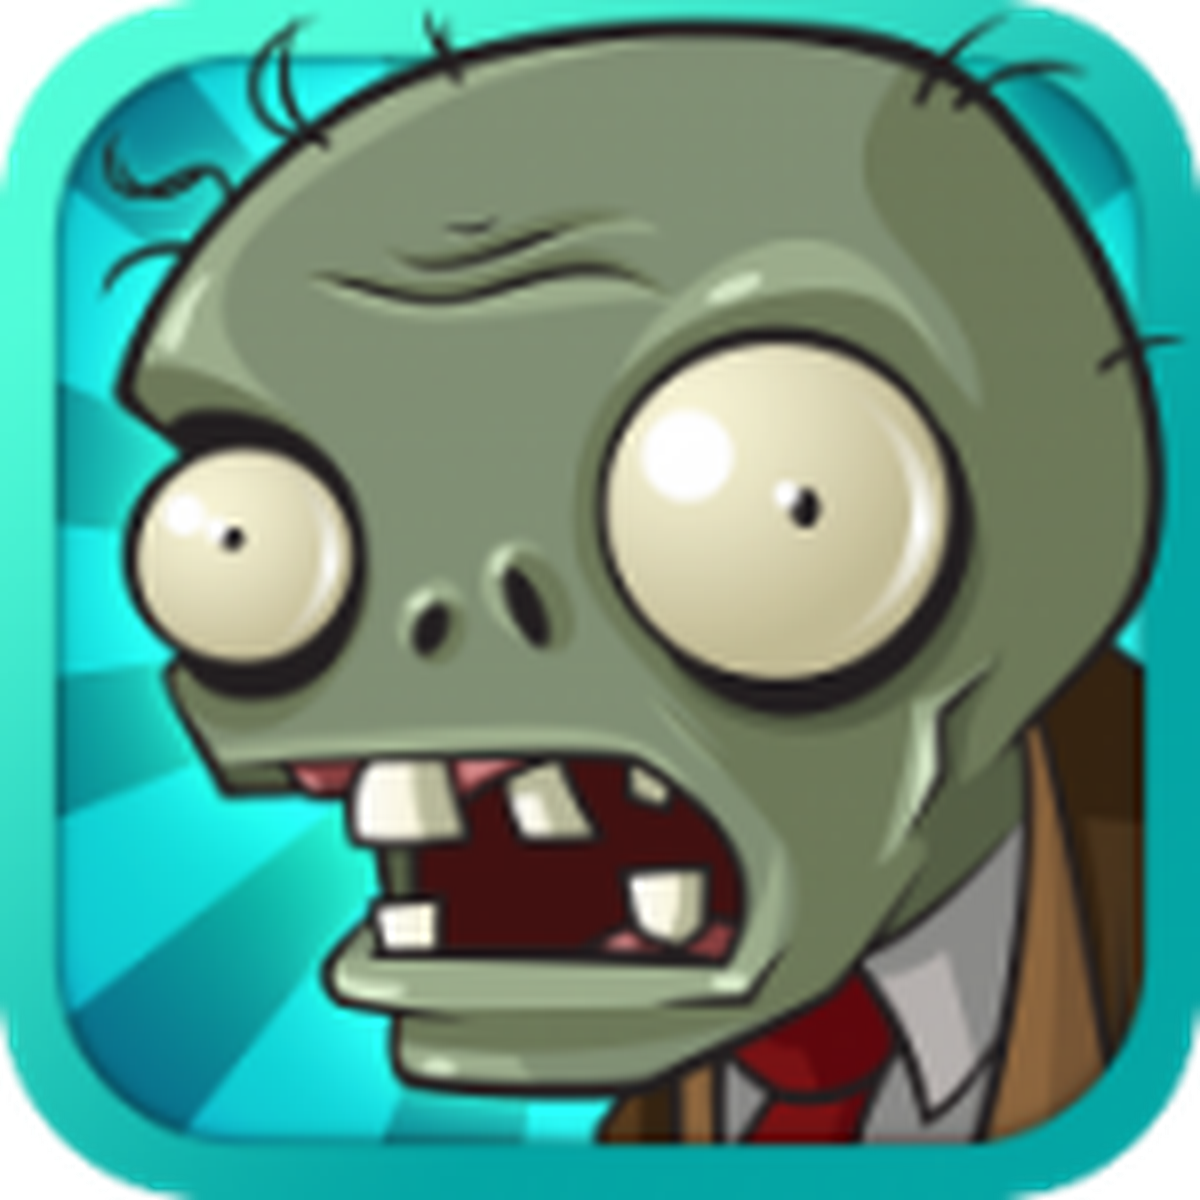 Plants vs. Zombies 2 review: it's about in-app payments ruining